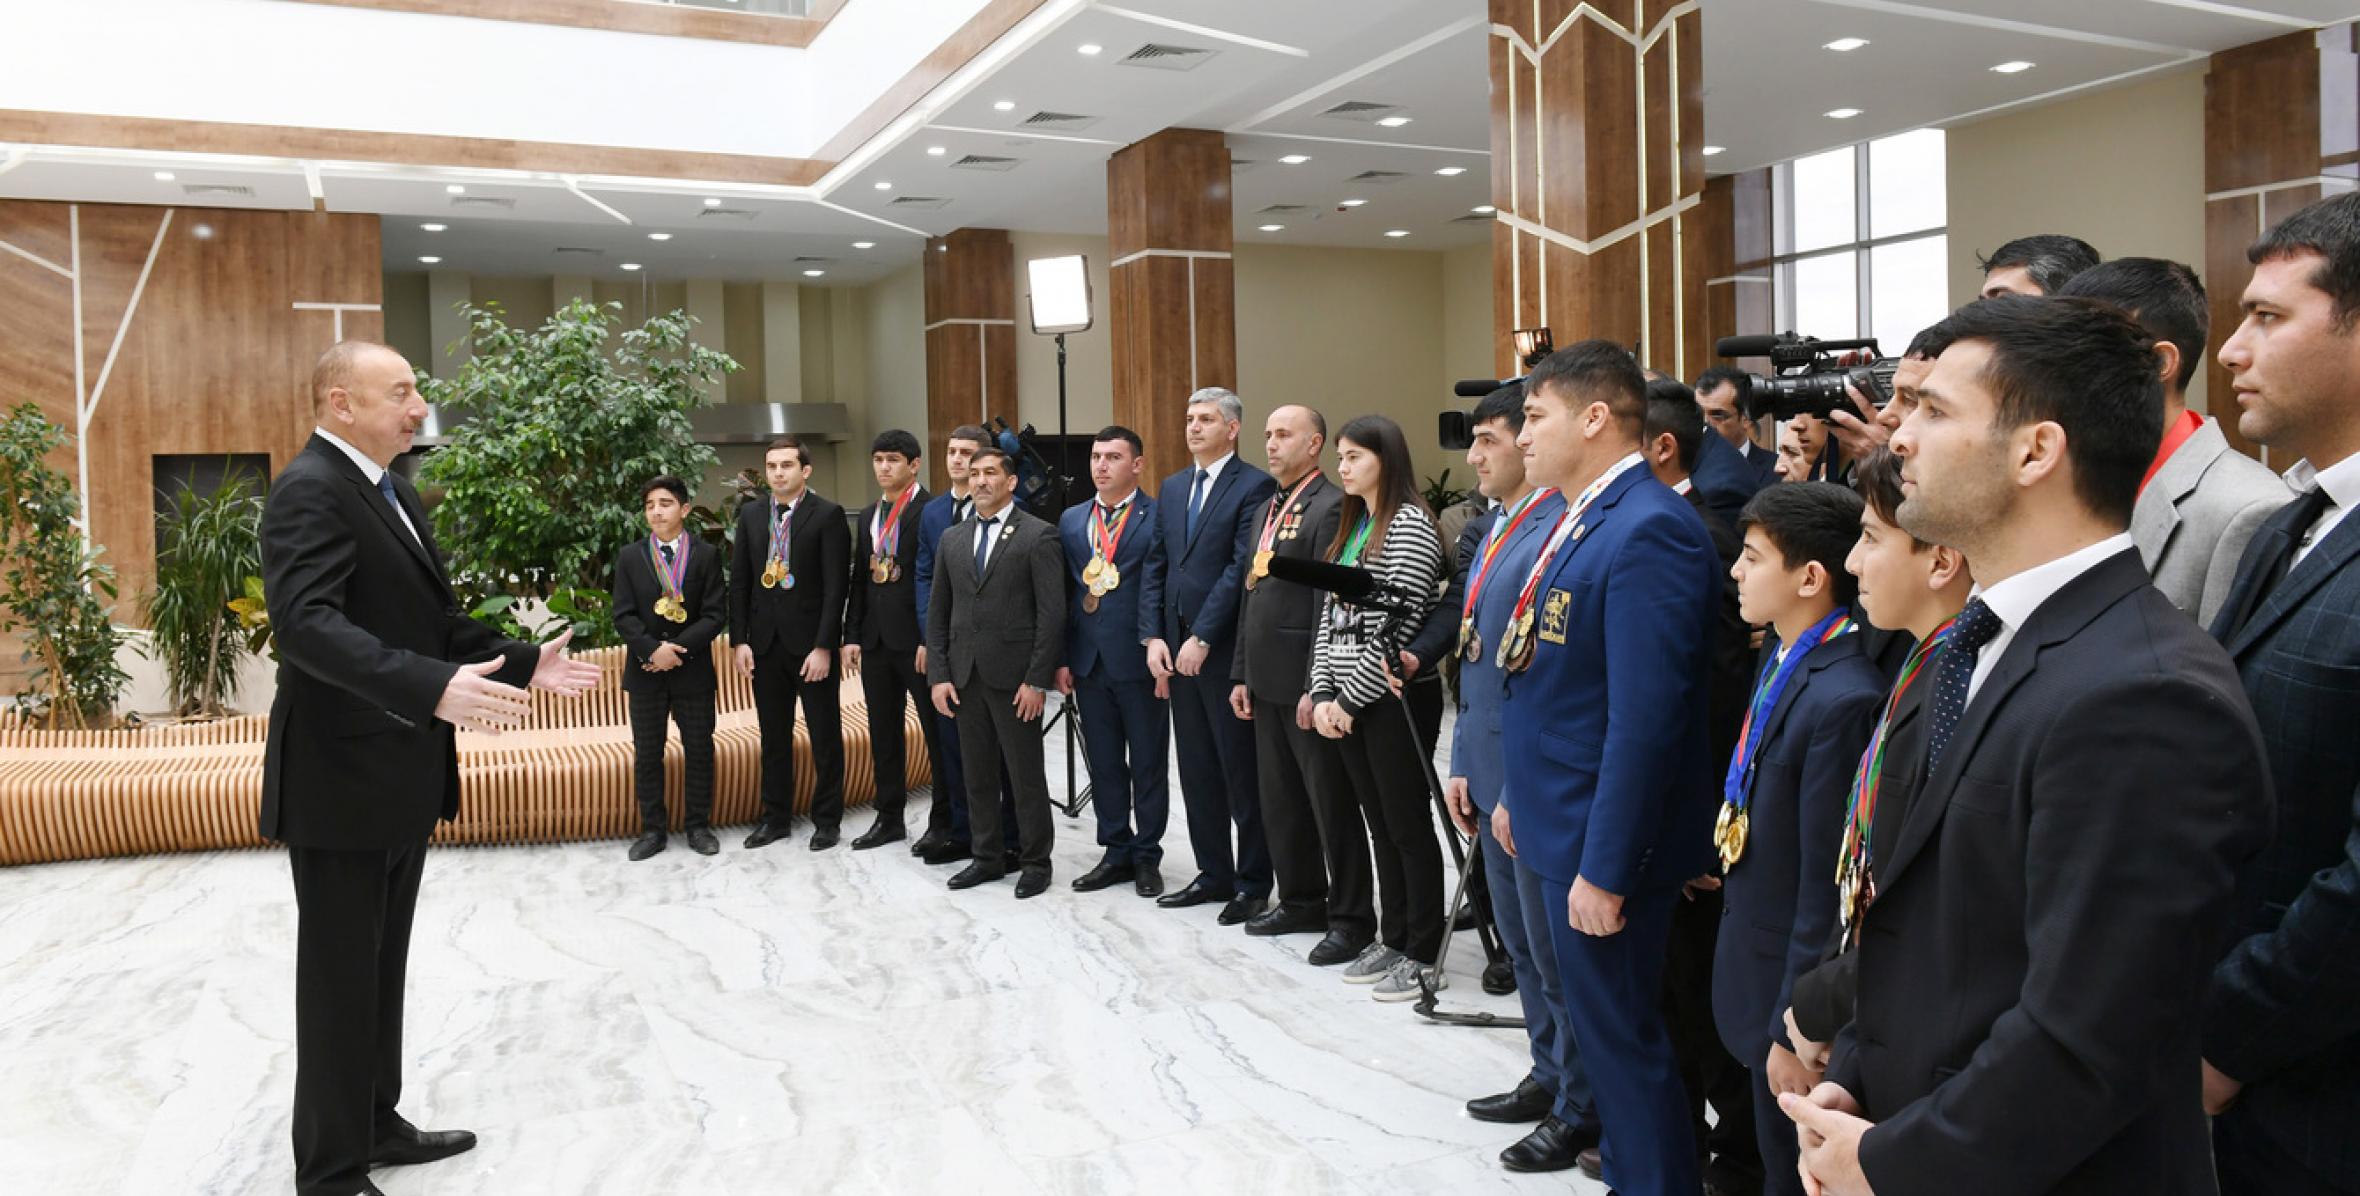 Speech by Ilham Aliyev at the opening of Beylagan Olympic Sport Complex